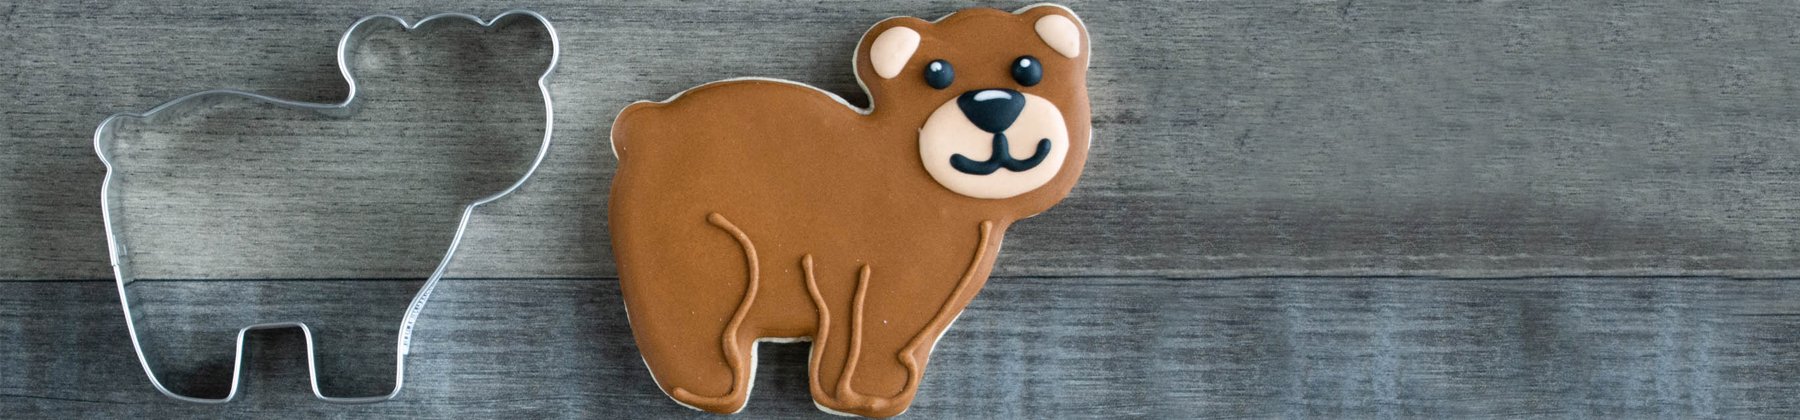 Photo of bear shaped cookie.